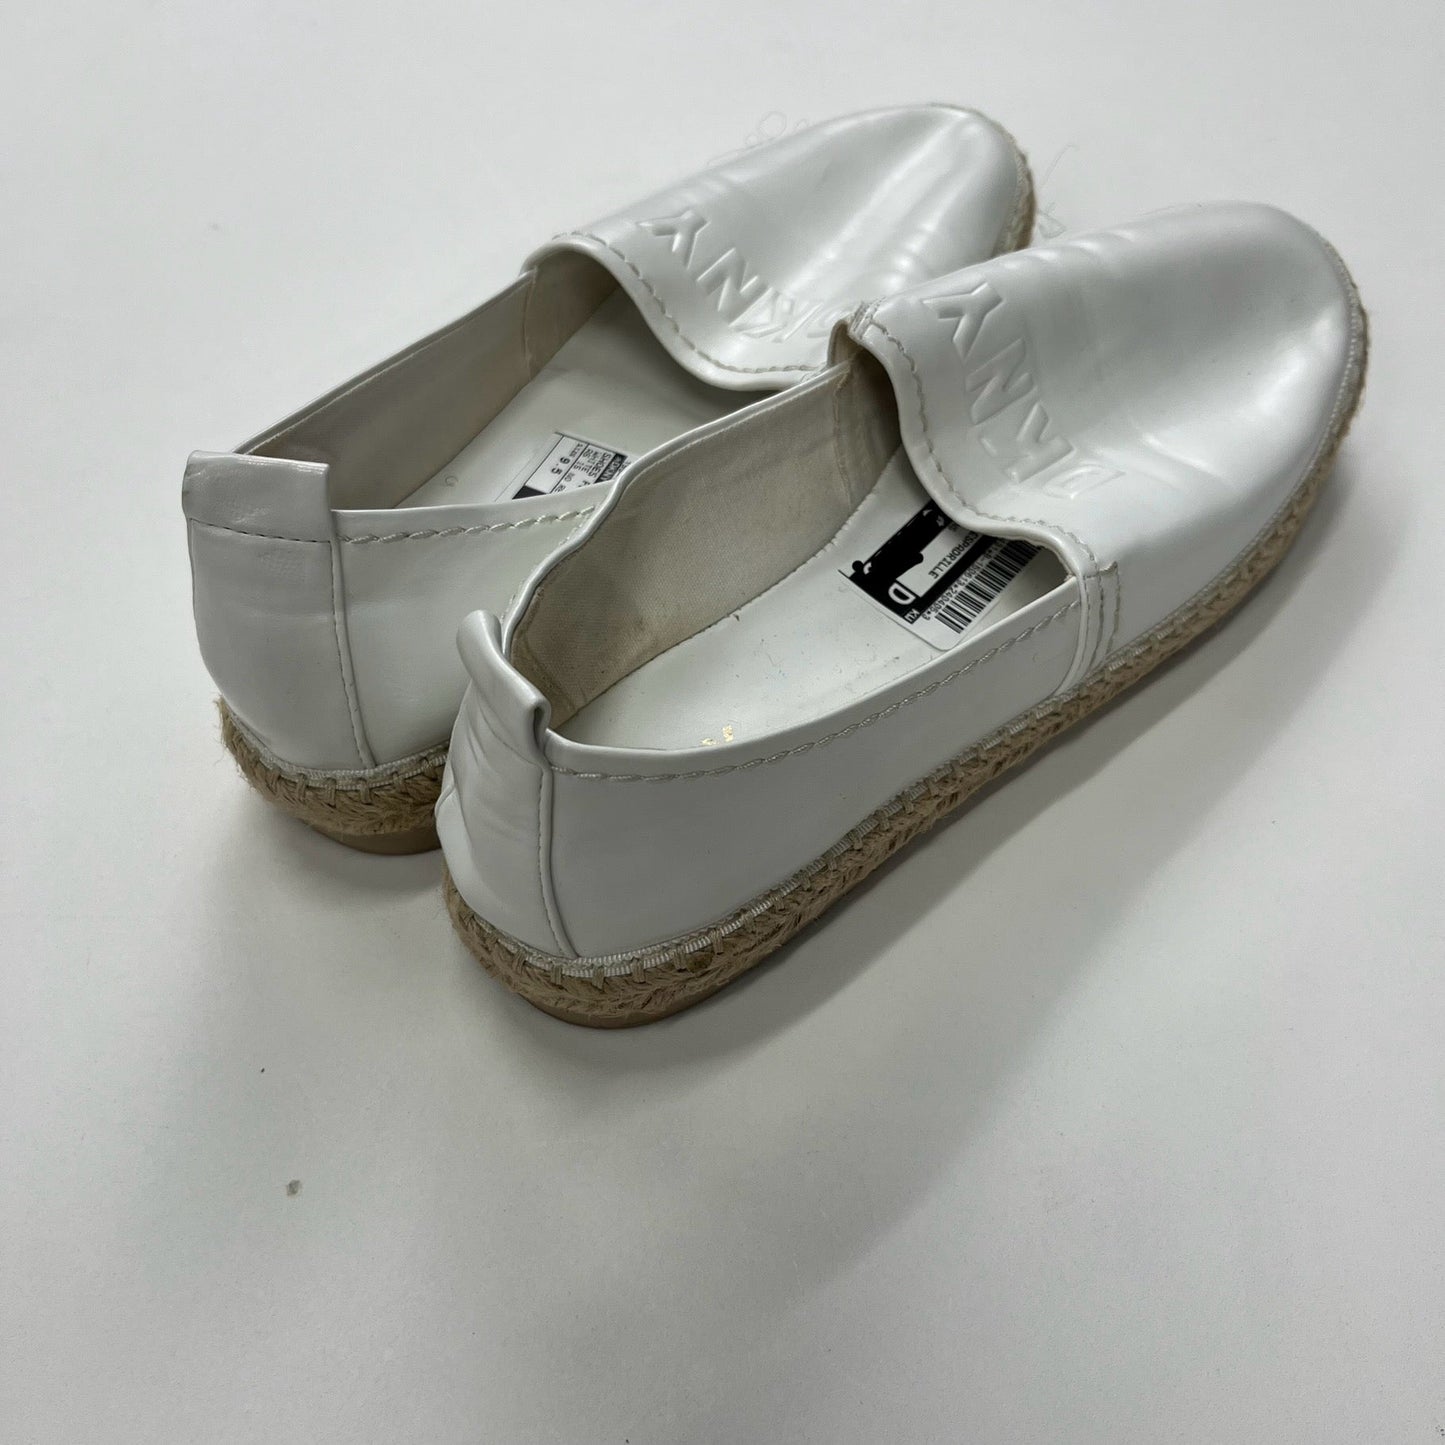 Shoes Flats Espadrille By Dkny  Size: 9.5